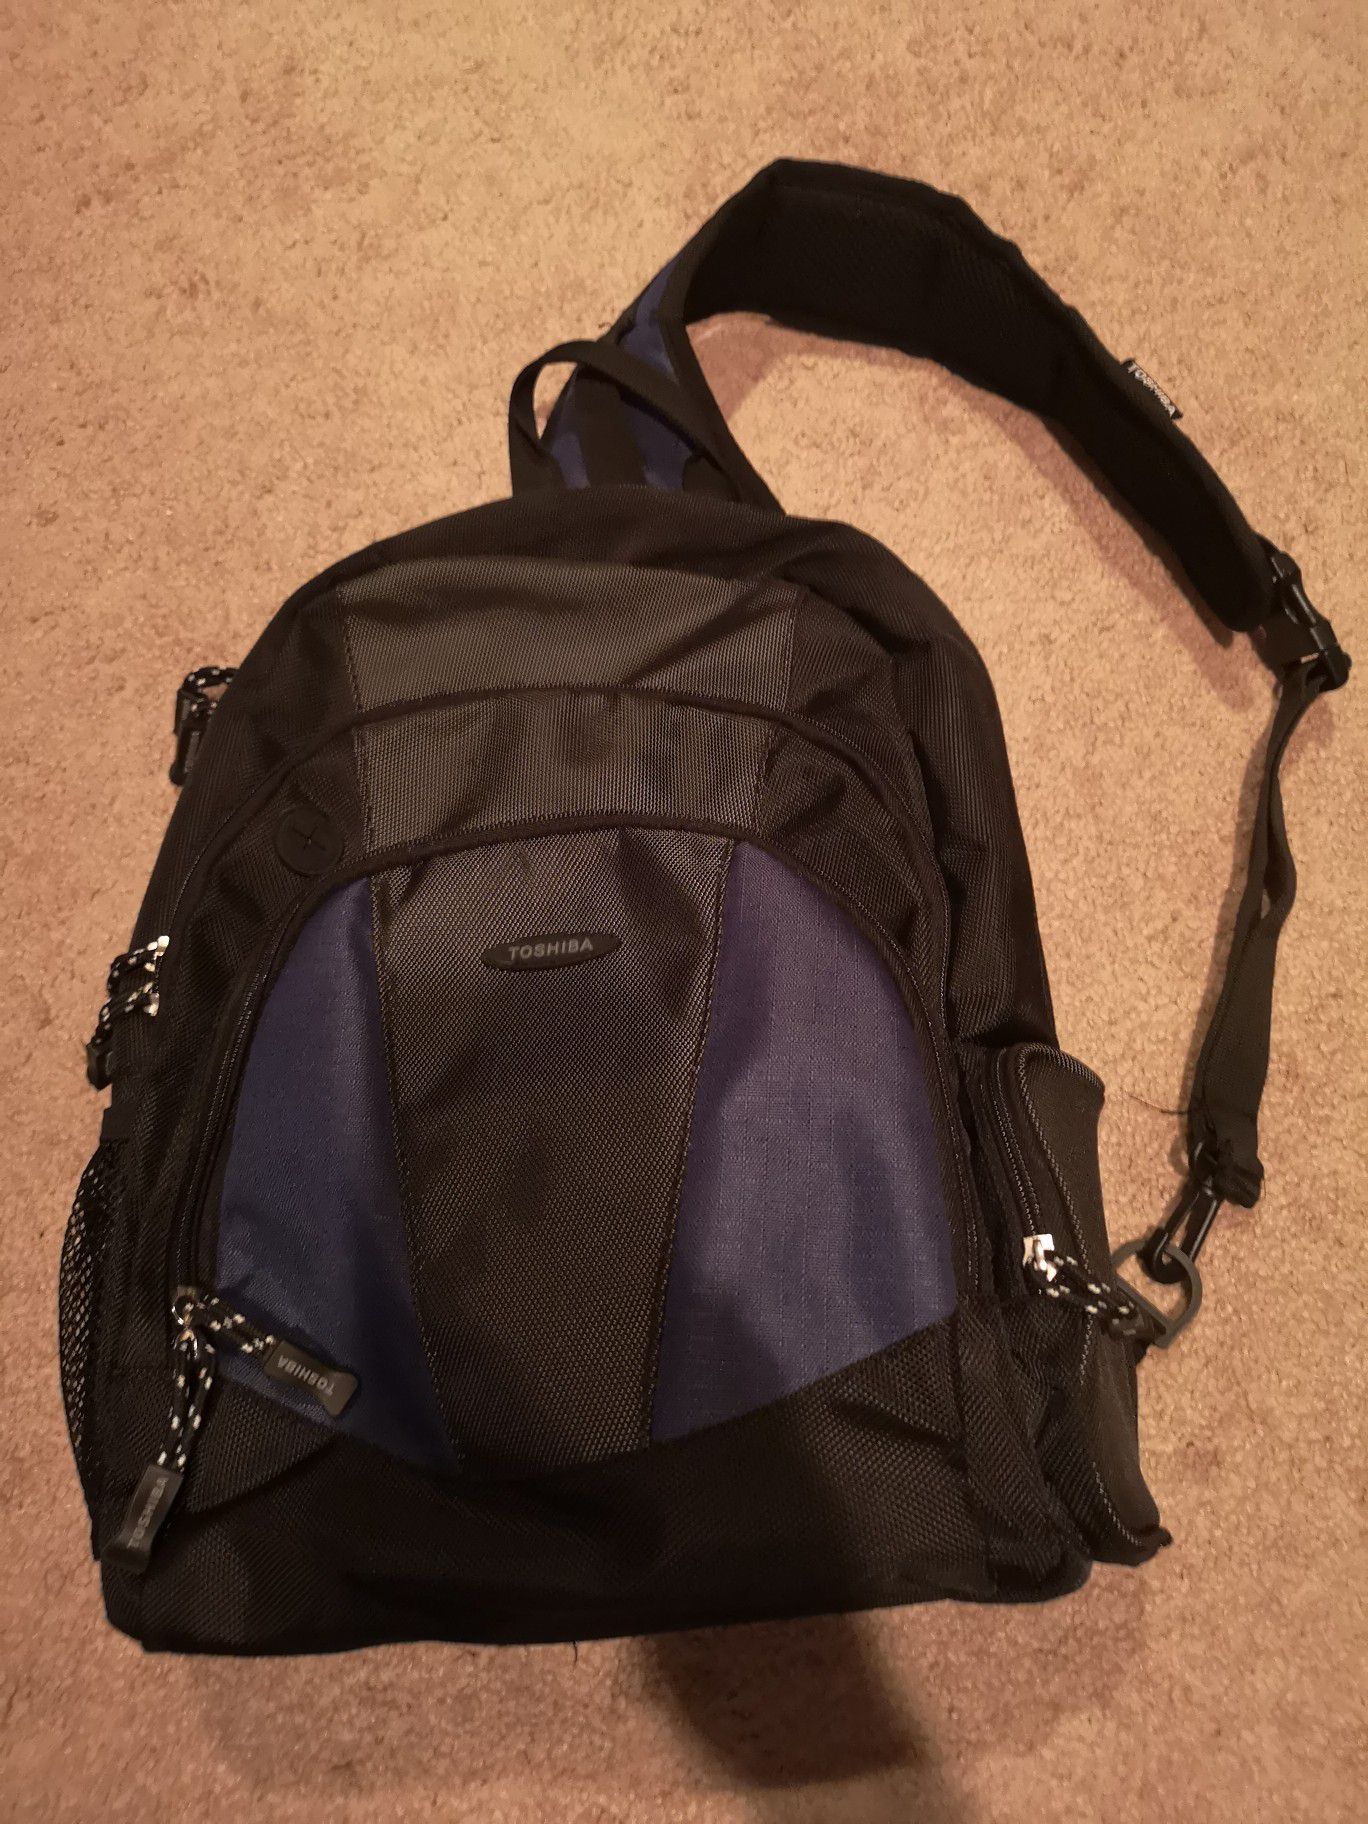 Toshiba 14" Laptop Carrying Sling Extreme Backpack